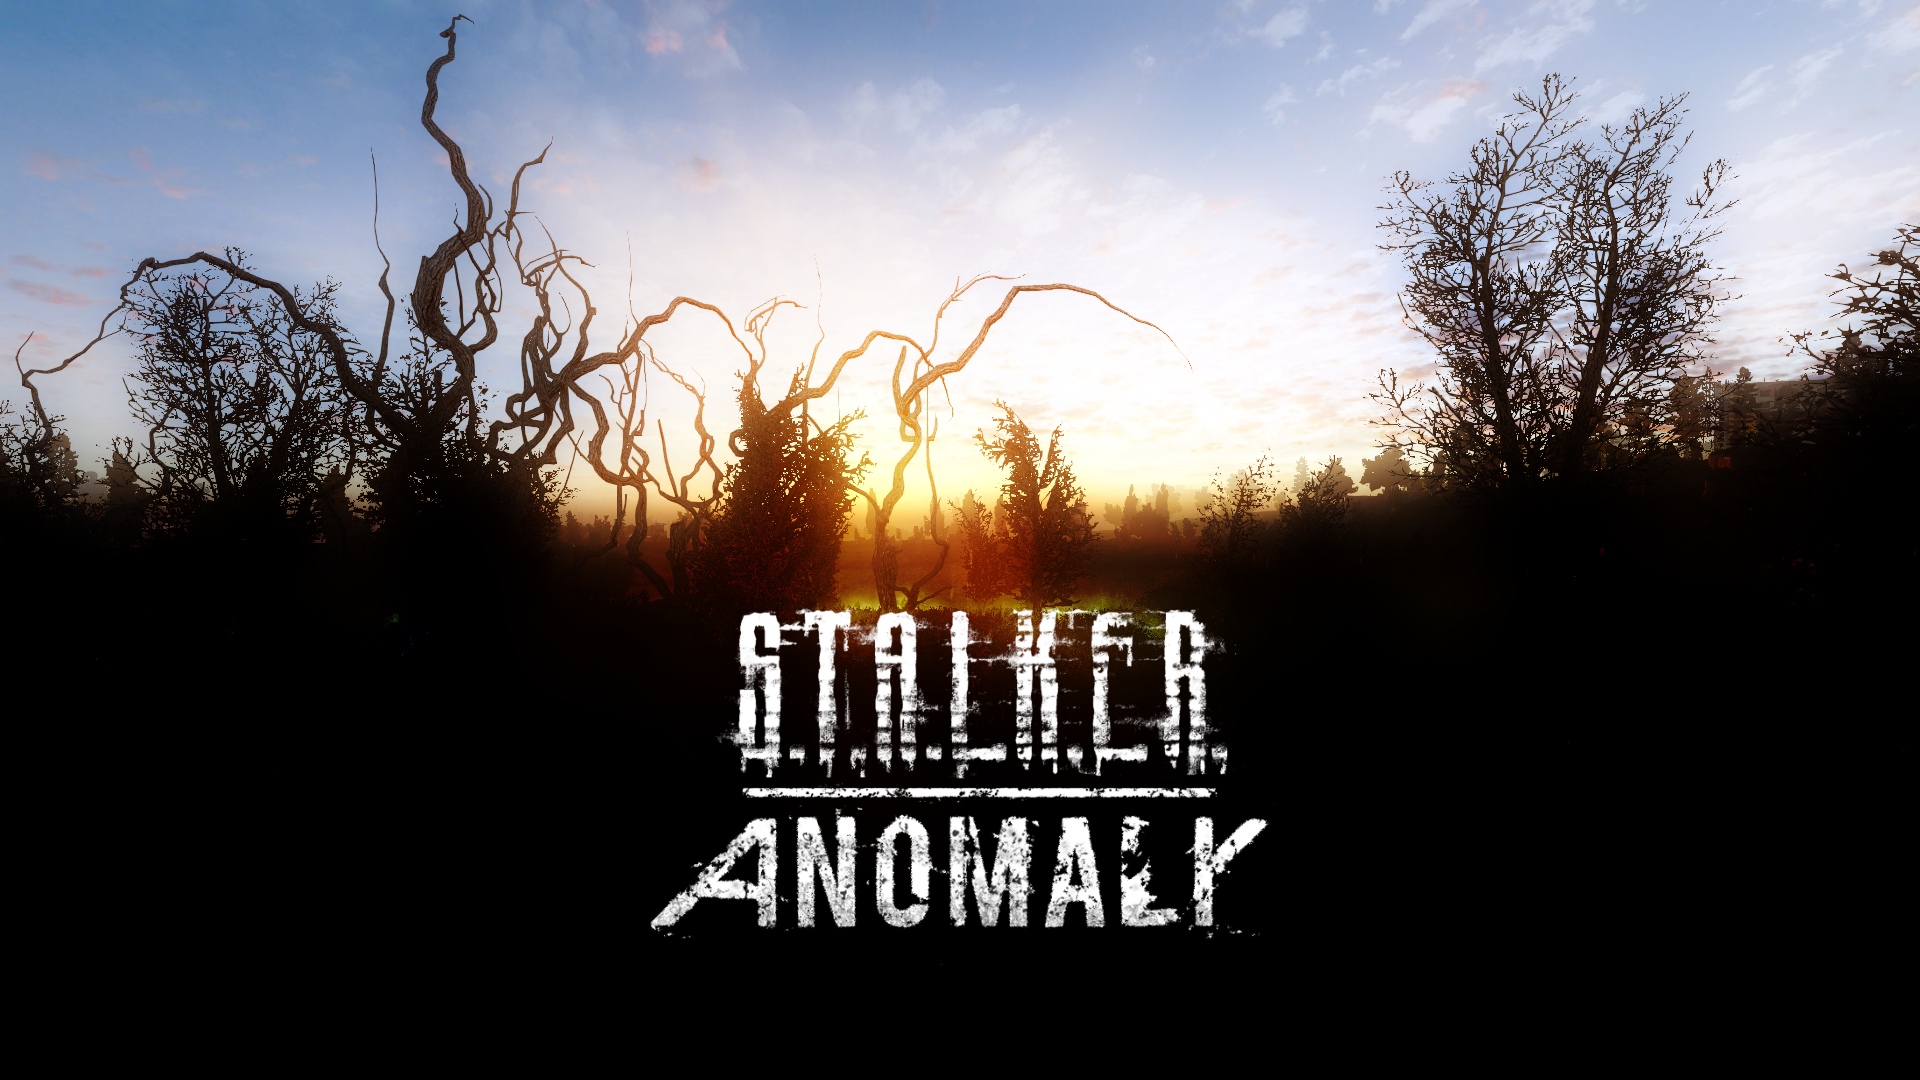 Call of chernobyl anomaly. S.T.A.L.K.E.R аномалия 1.5.1. Сталкер аномалия 1.5.2. Сталкер аномалия 1.5.1. Сталкер 2 аномалии.